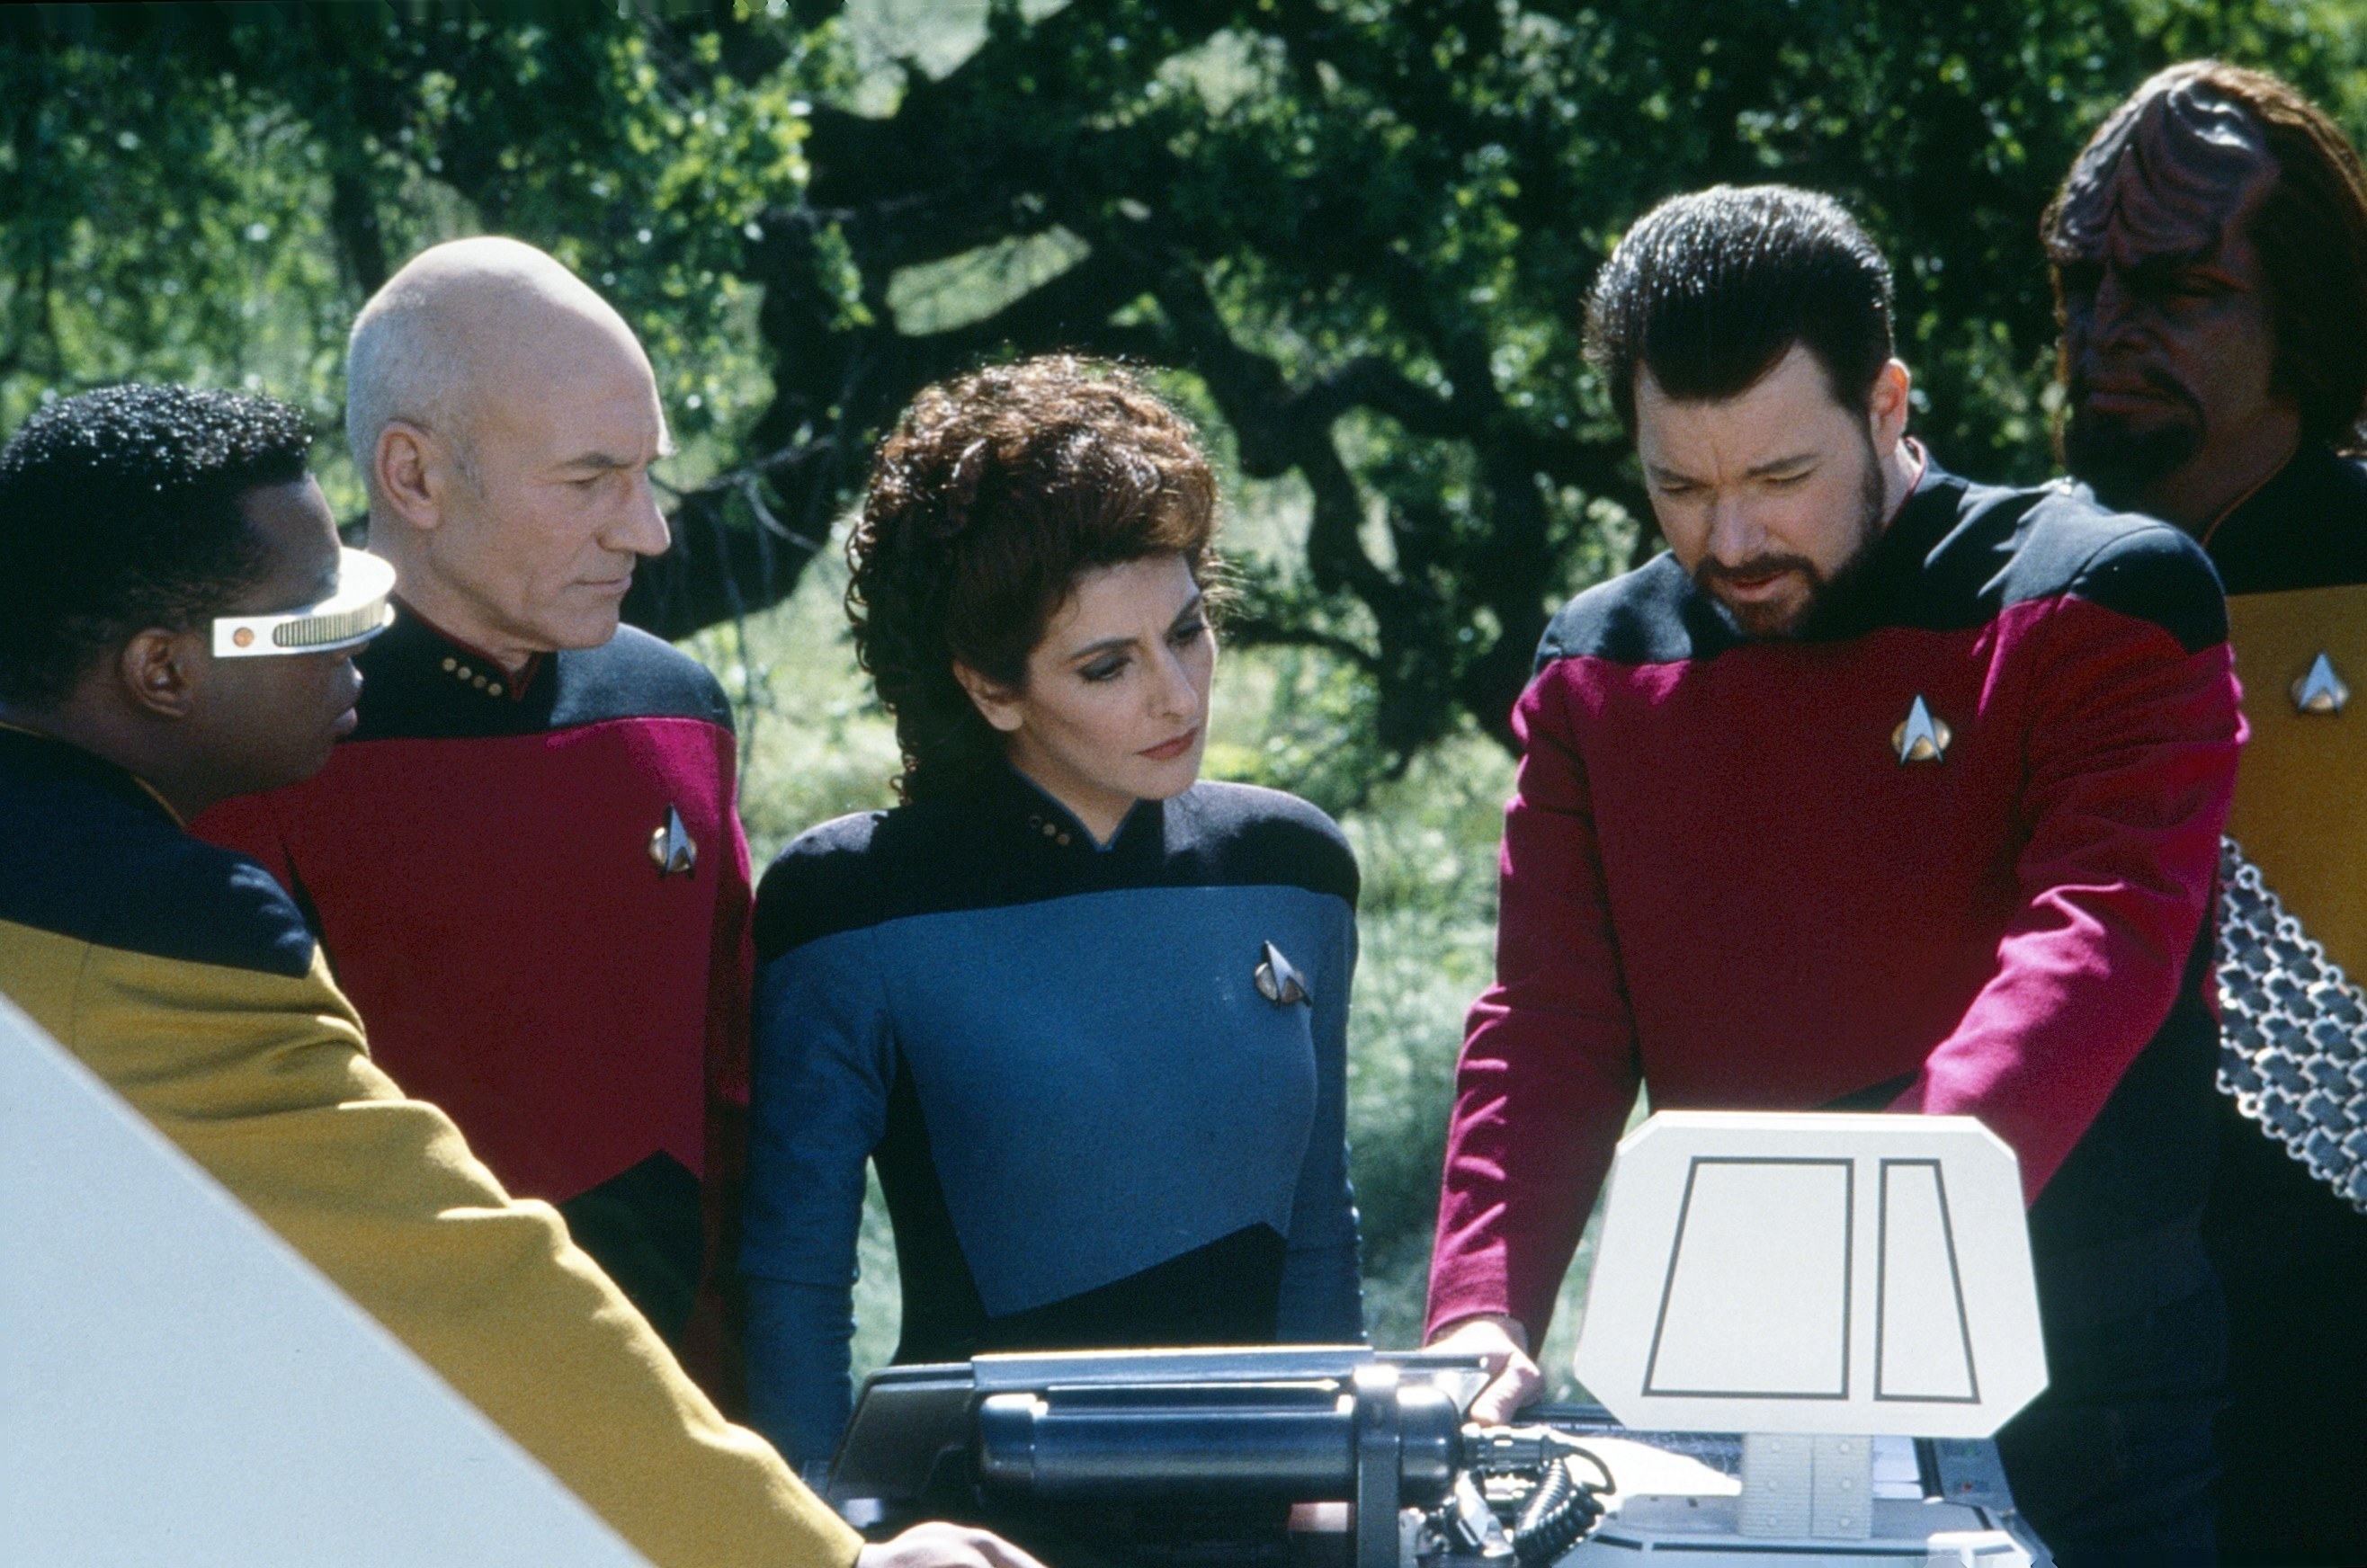 the cast of &quot;Star Trek: The Next Generation&quot; looking at something